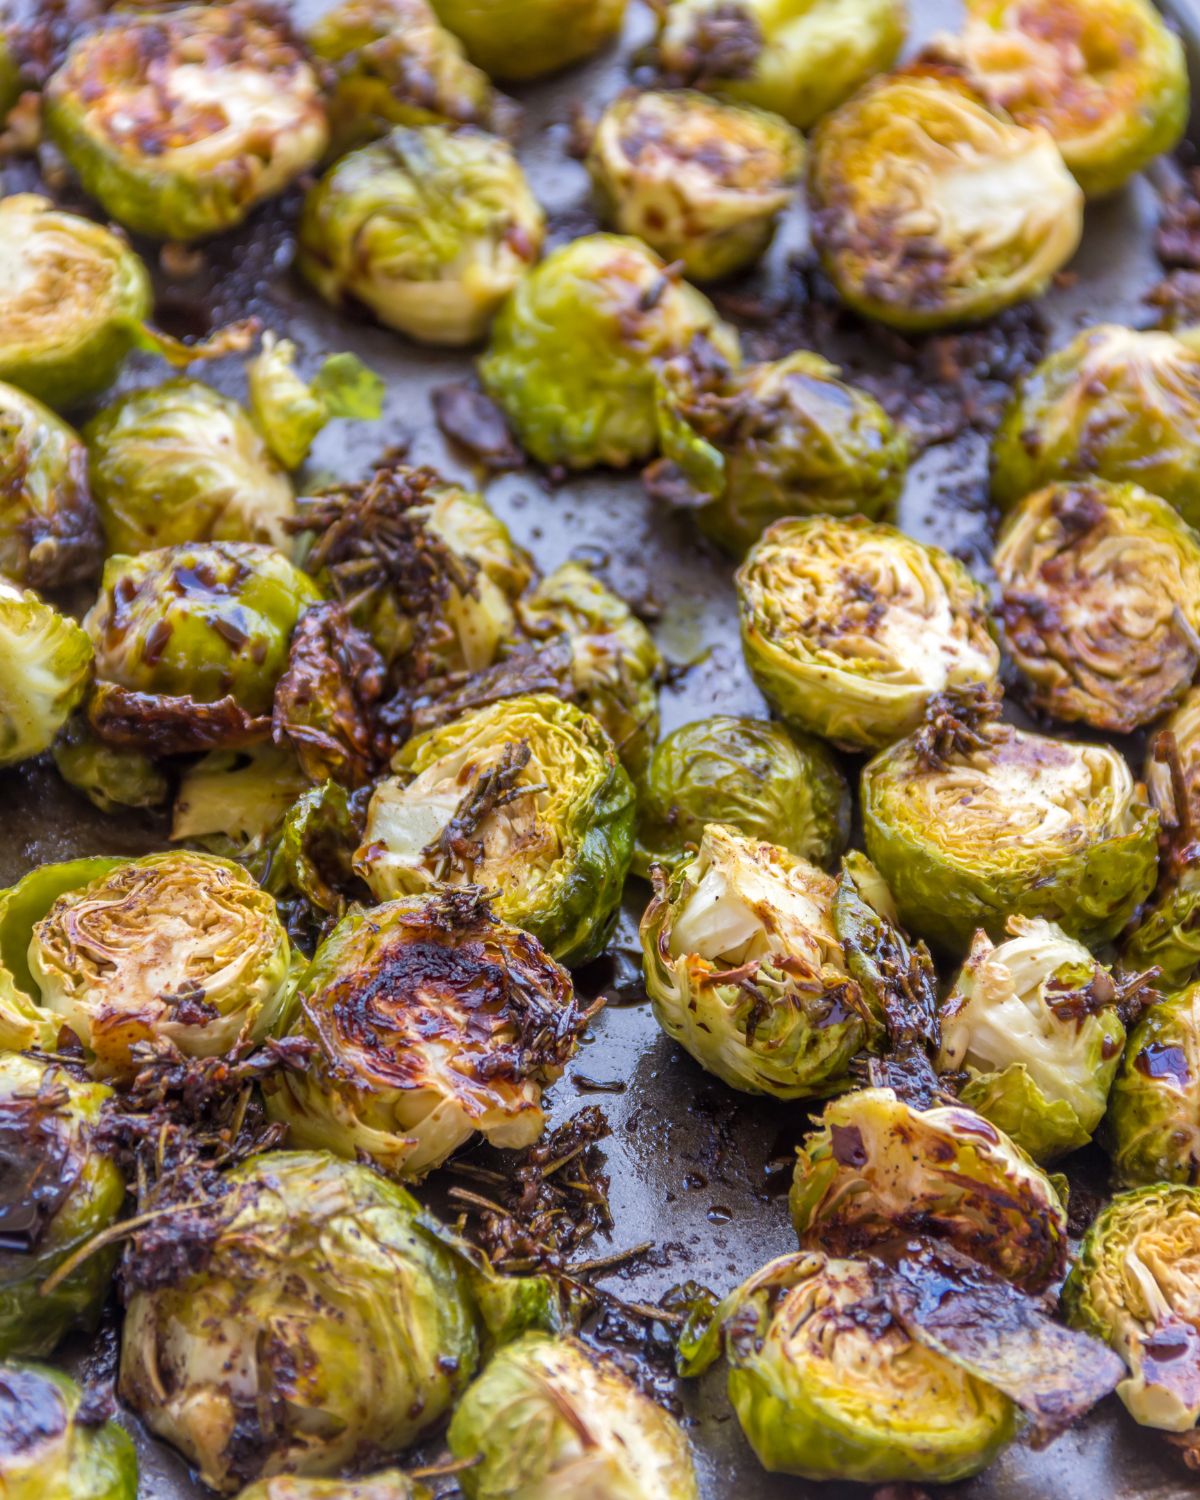 Cooked sprouts on a baking tray.